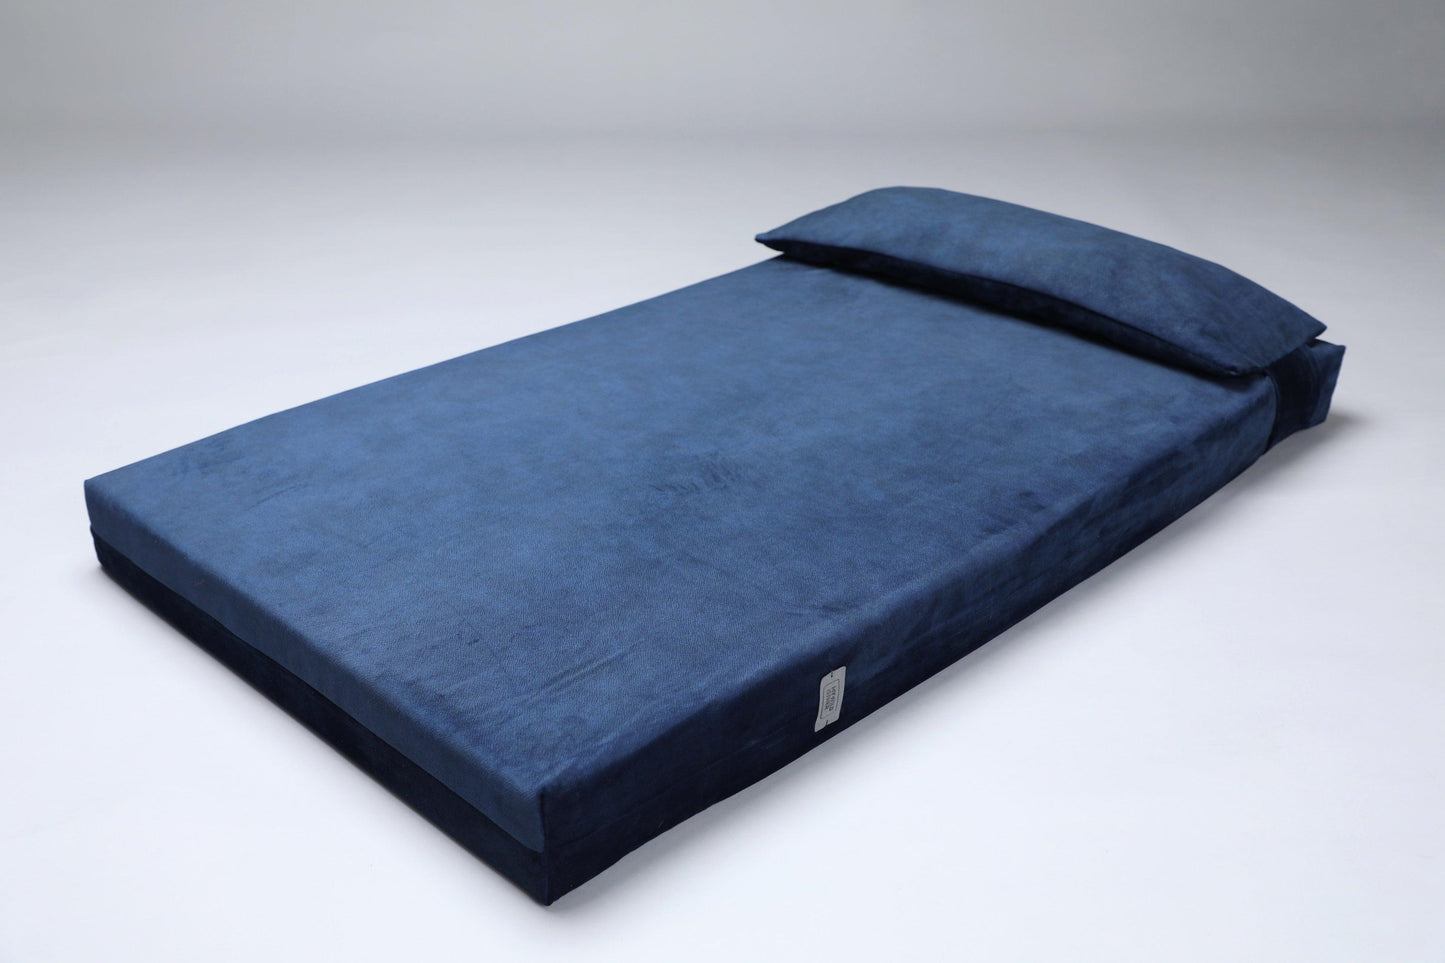 2-sided velvet dog bed. ROYAL BLUE - European handmade dog accessories by My Wild Other